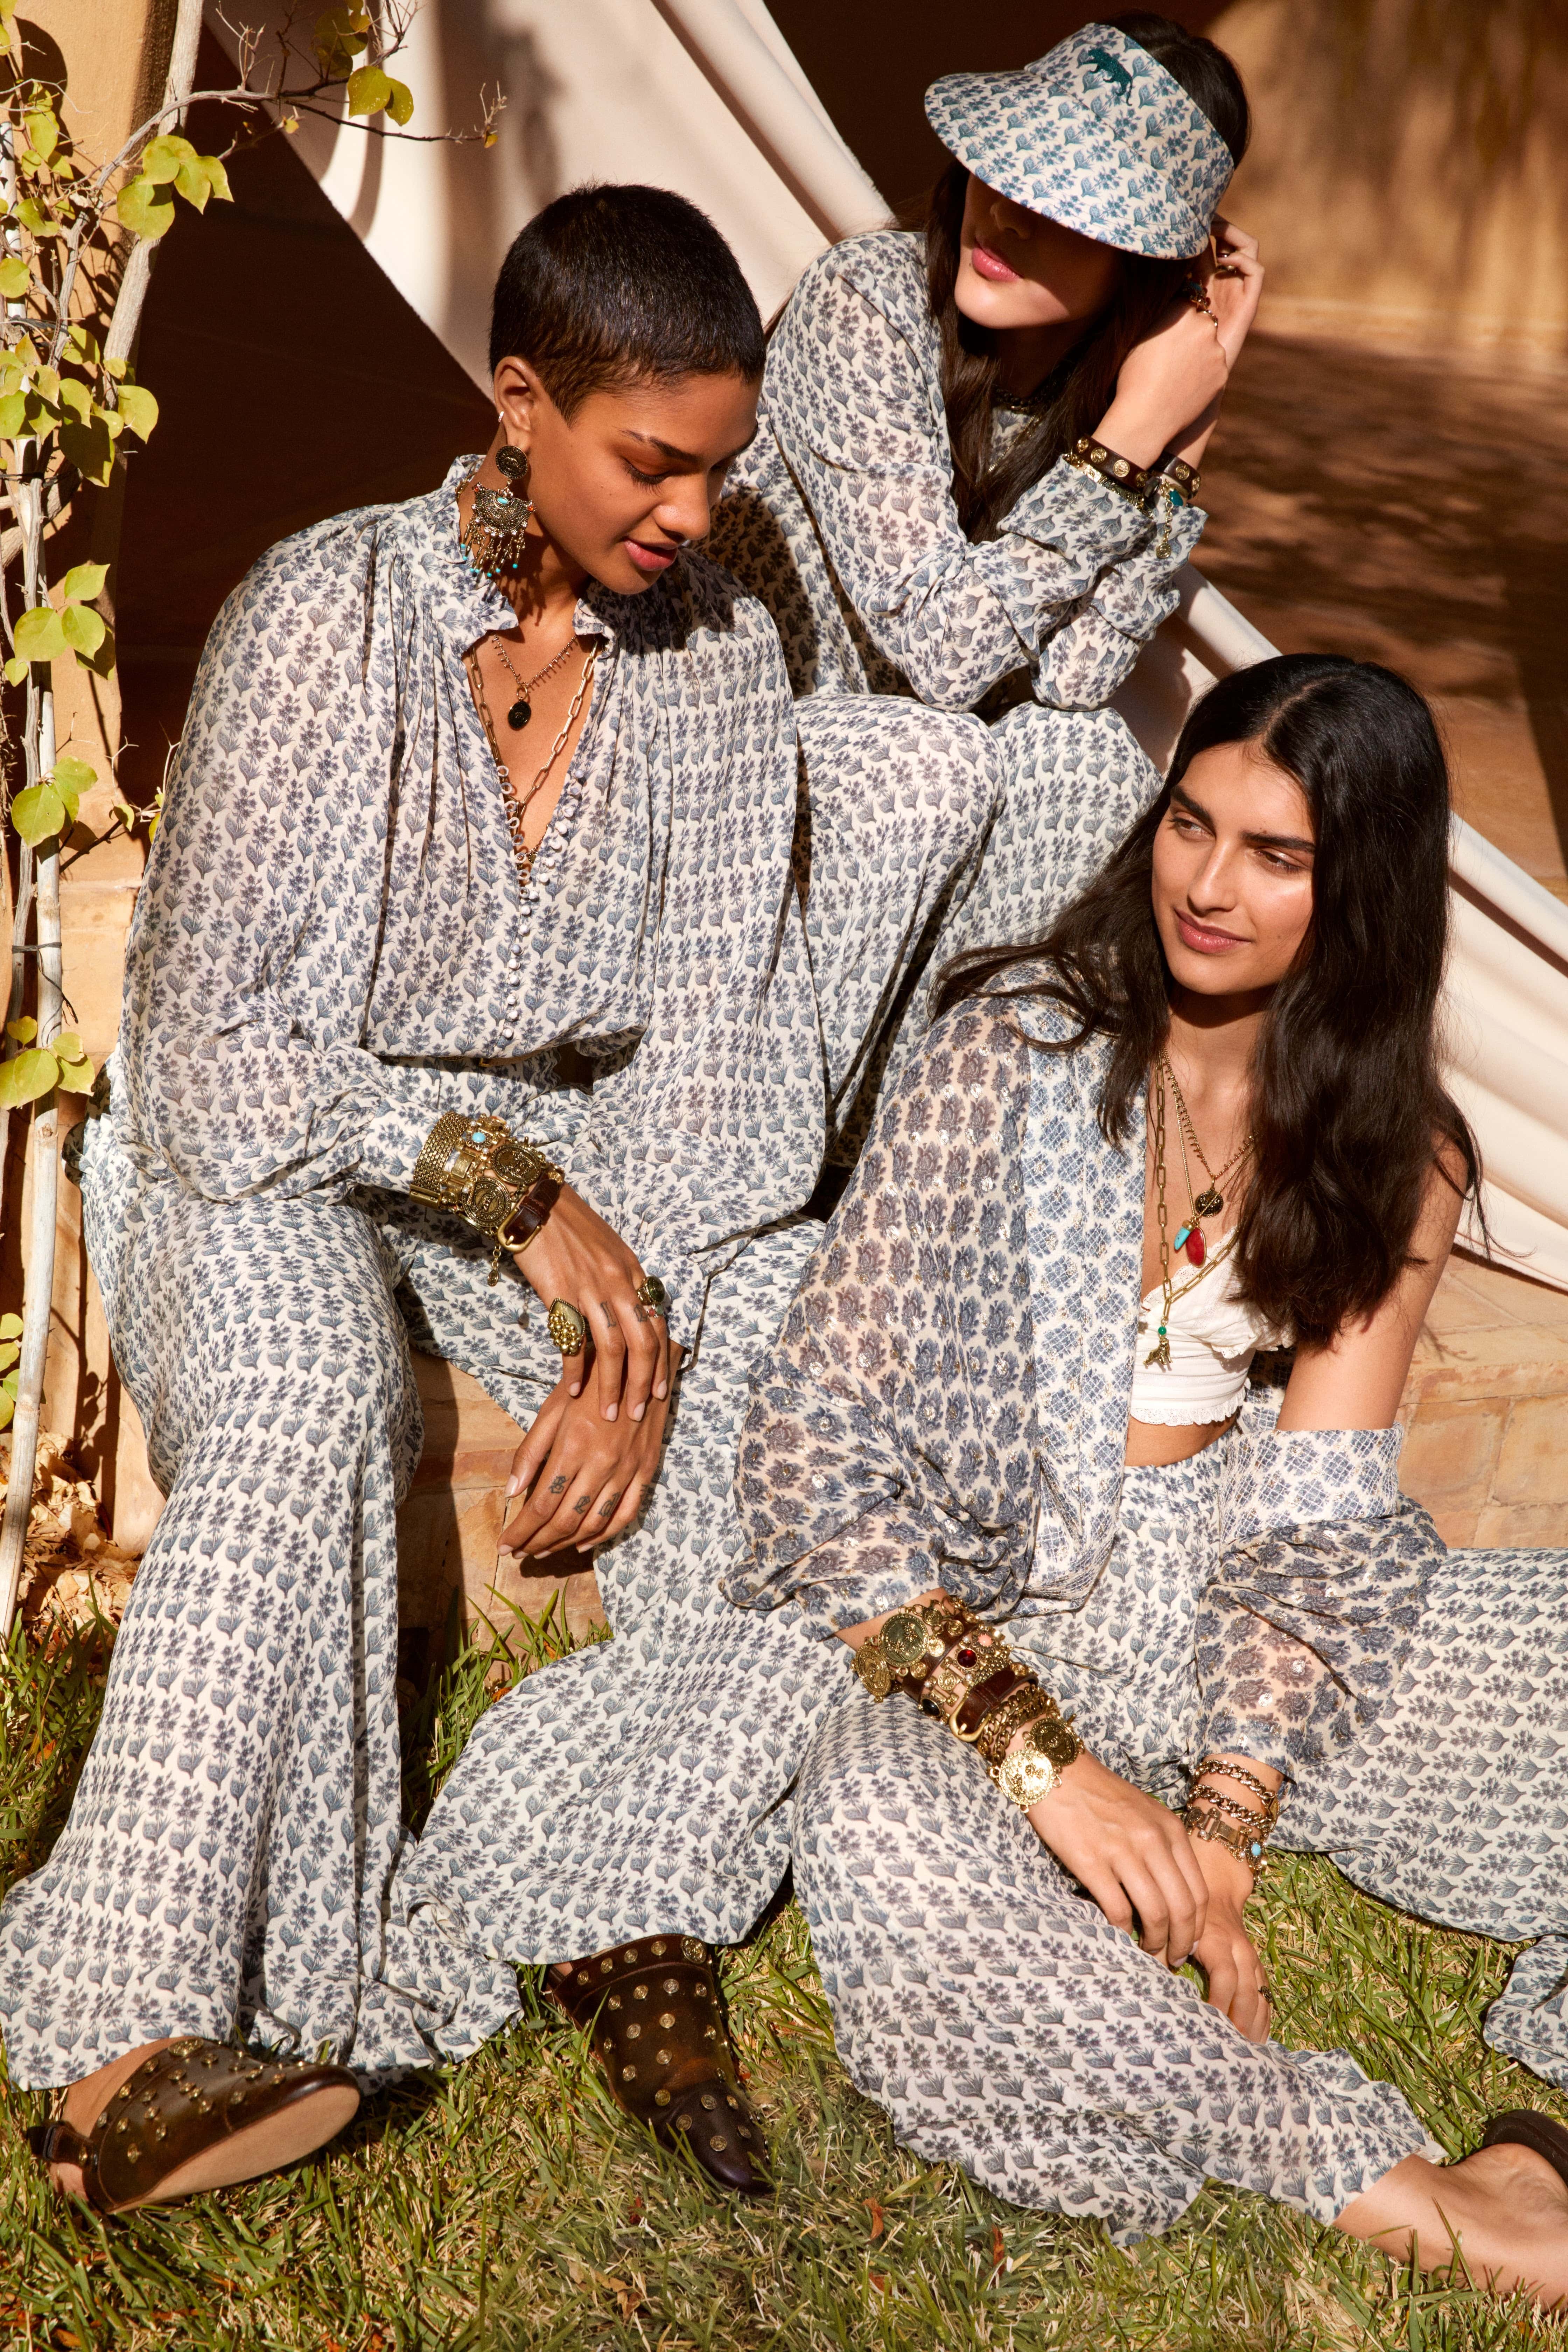 H&M Home Launches Spring 2021 Collection